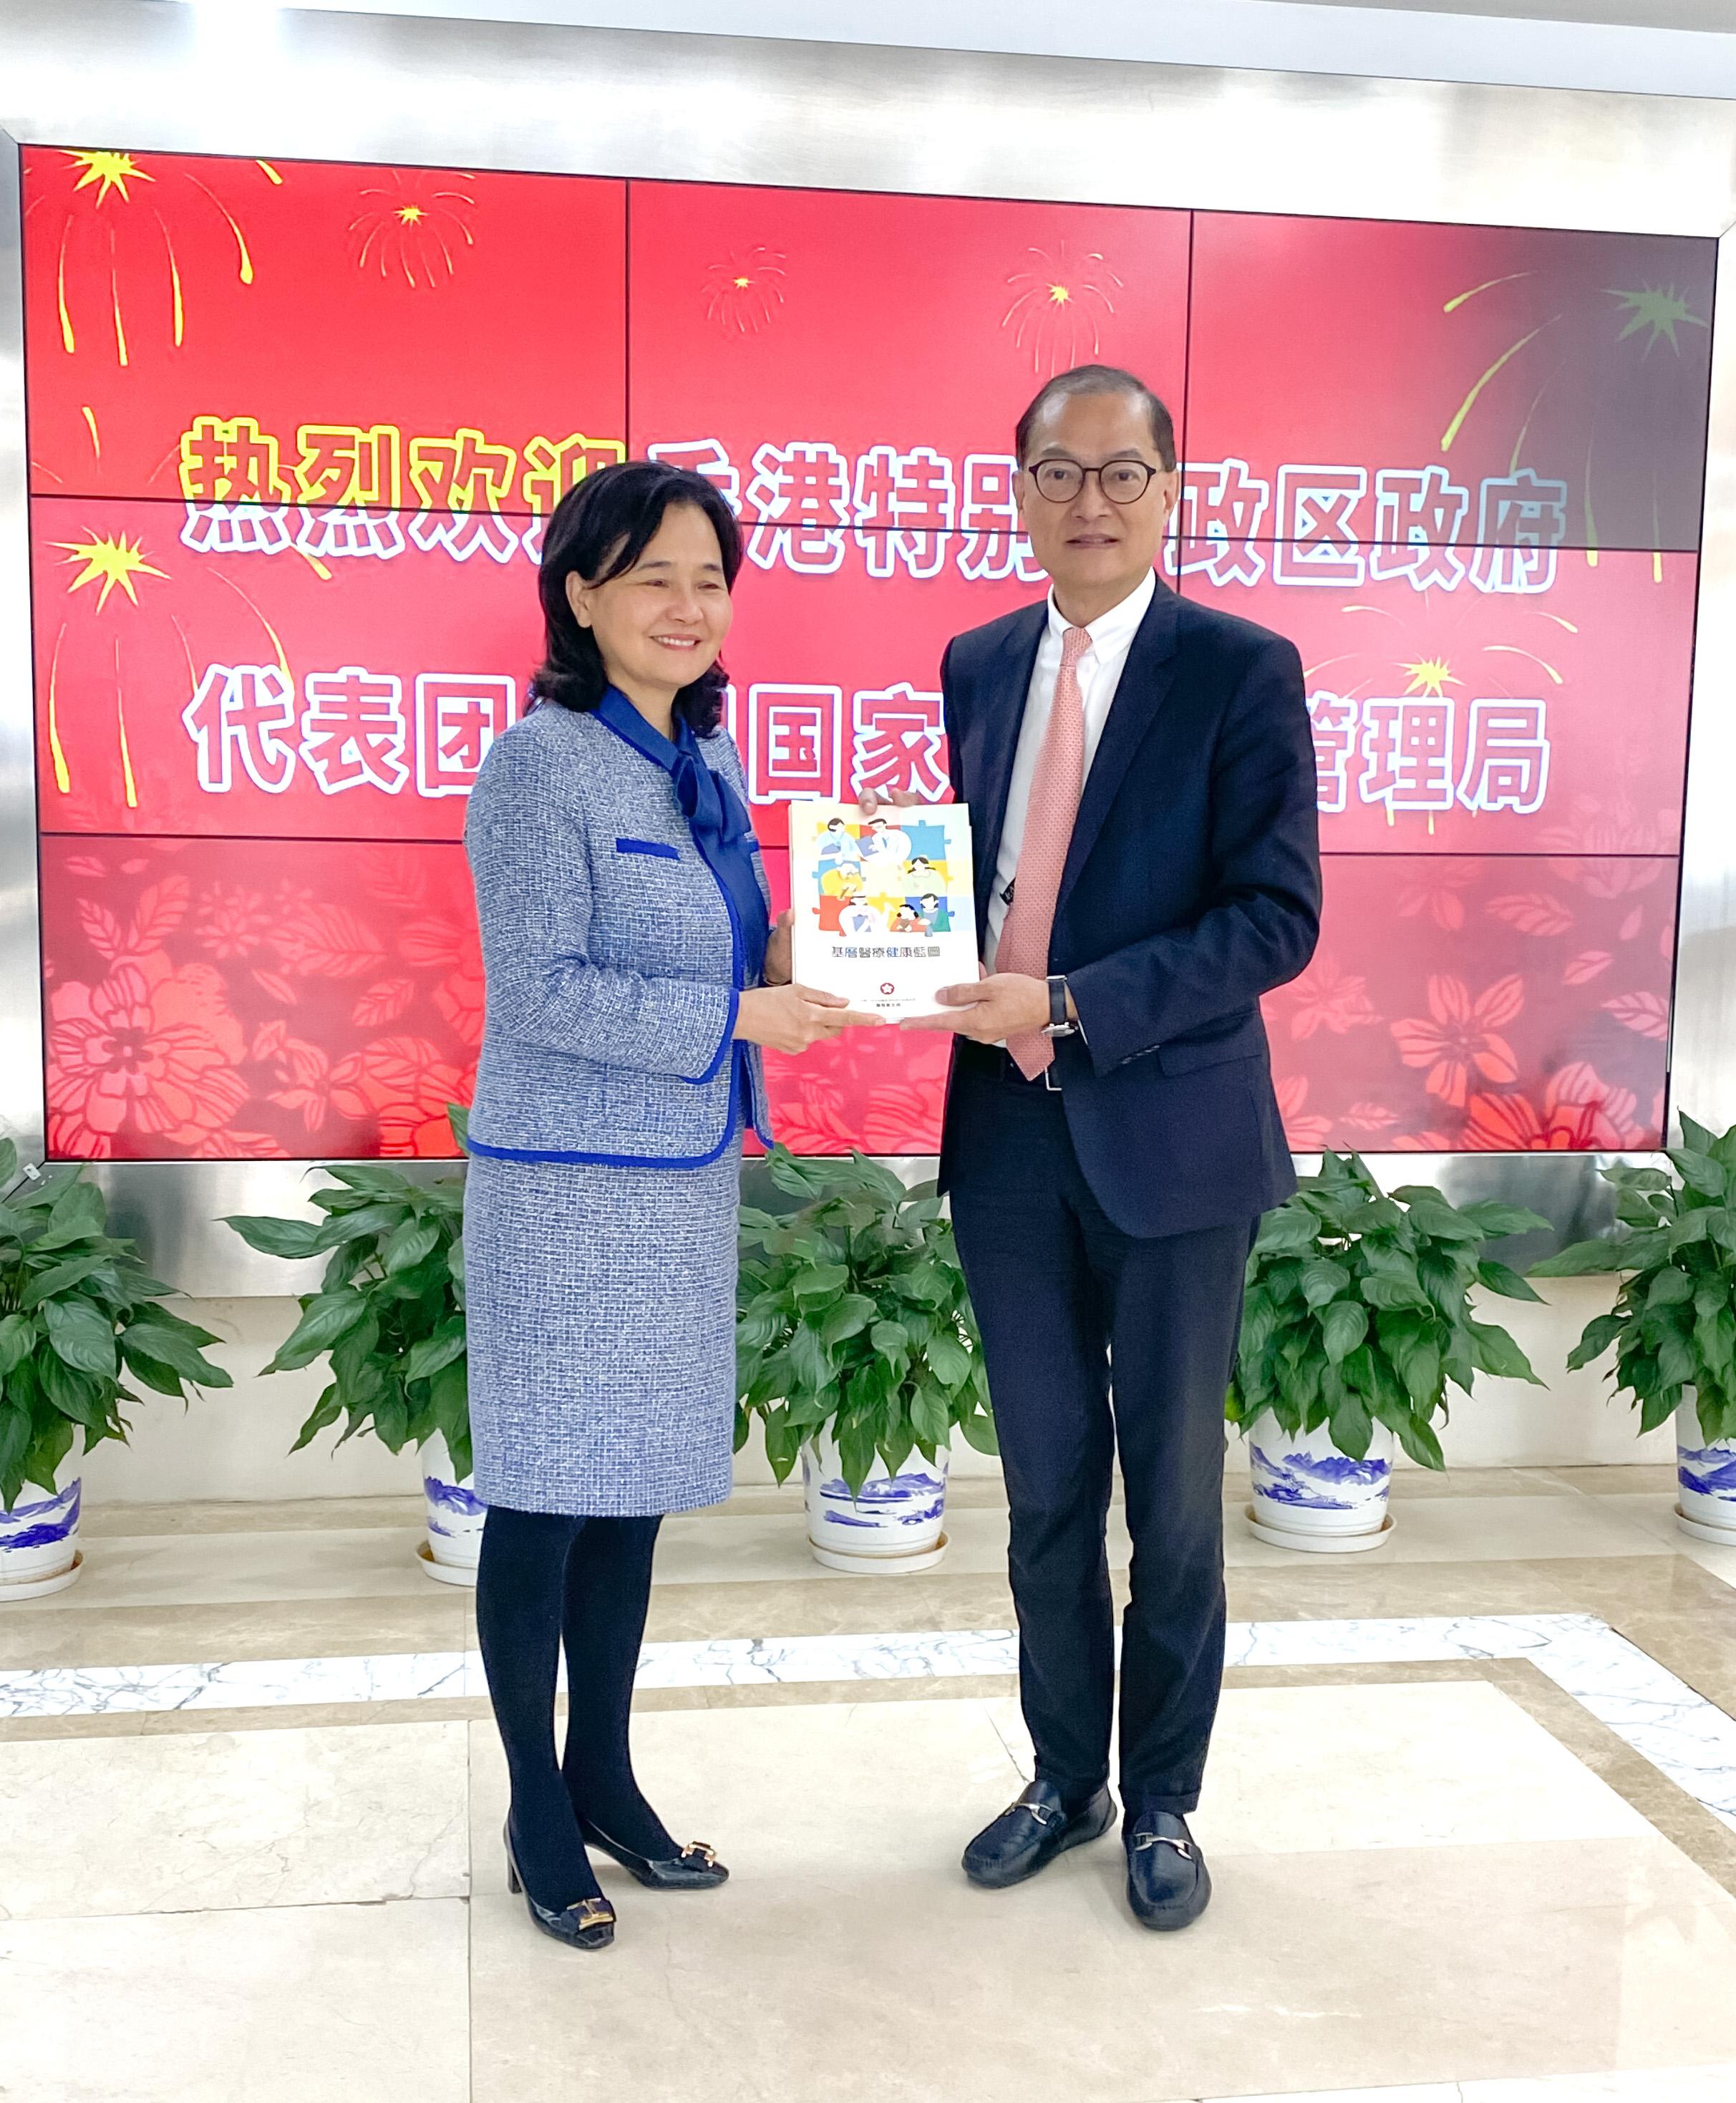 The Secretary for Health, Professor Lo Chung-mau and his delegation called on the National Administration of Traditional Chinese Medicine (NATCM) today (March 16). Photo shows Professor Lo (right) presenting the Primary Healthcare Blueprint released last year to the Party Secretary and Vice Commissioner of the NATCM, Professor Yu Yanhong (left).